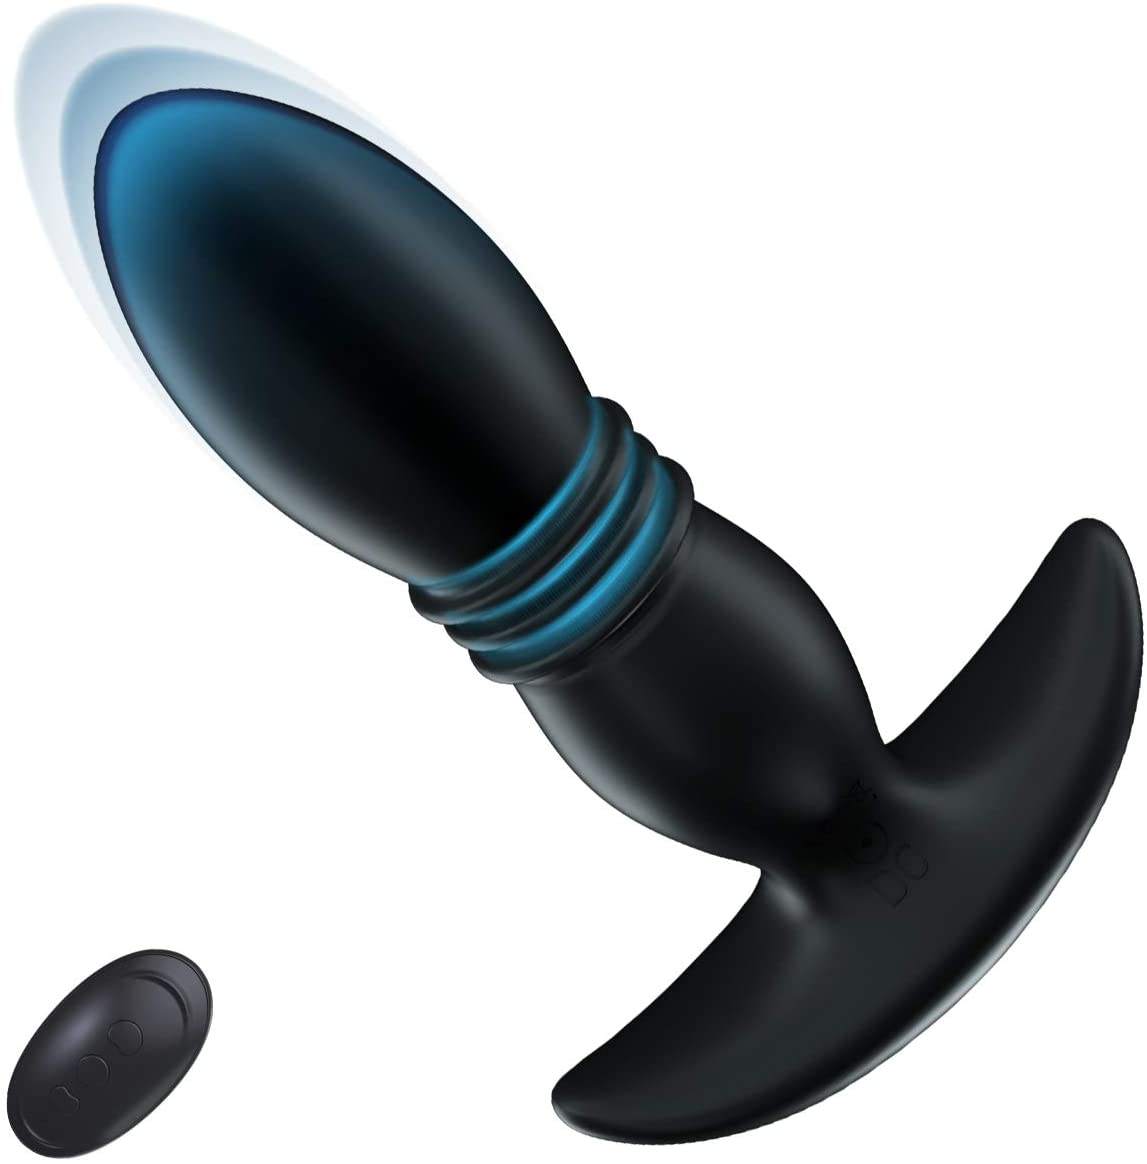 The ultimate in pleasure technology – Domlust Remote Control Thrusting Prostate Massager.